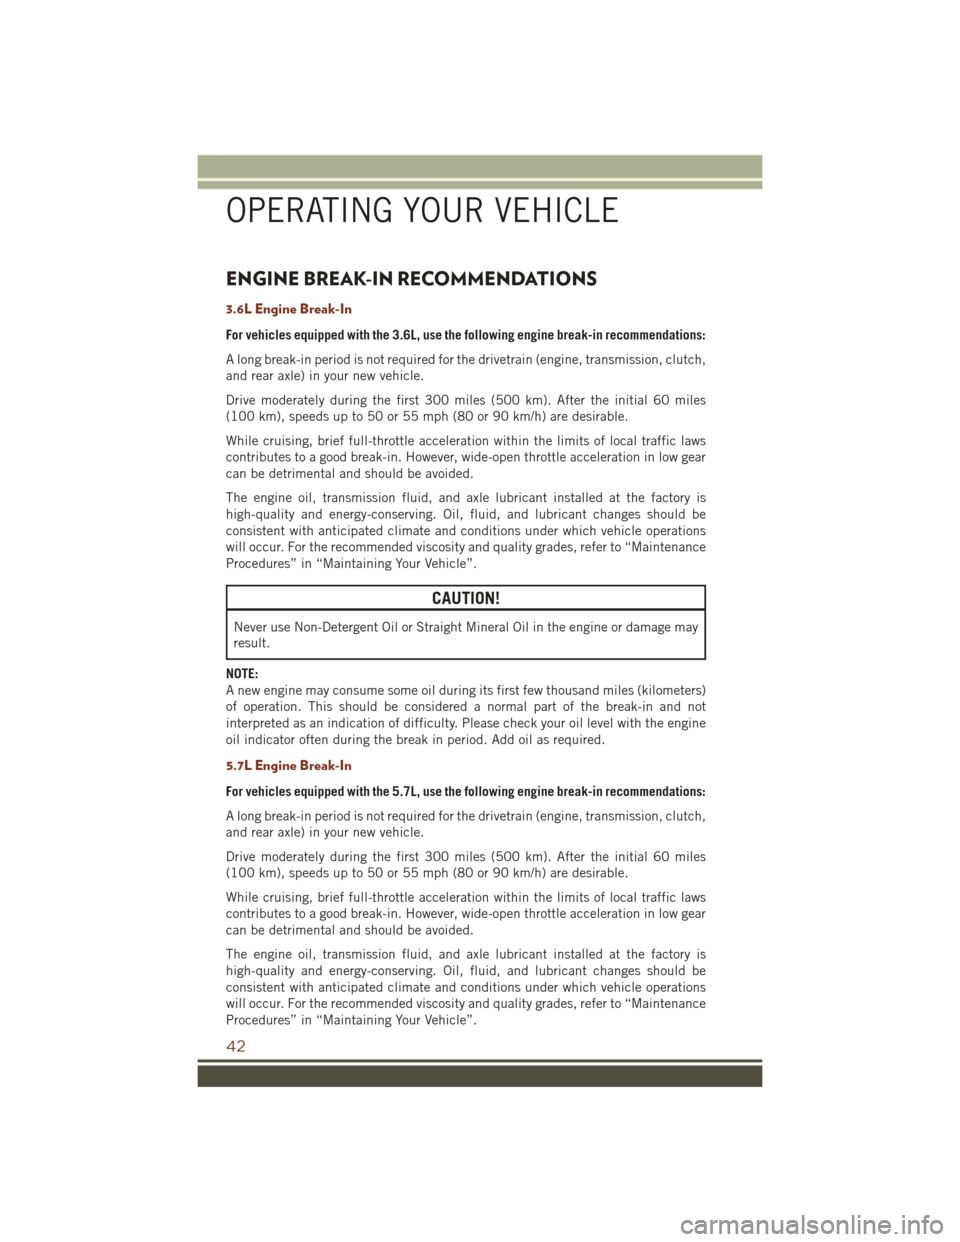 JEEP GRAND CHEROKEE 2016 WK2 / 4.G Service Manual ENGINE BREAK-IN RECOMMENDATIONS
3.6L Engine Break-In
For vehicles equipped with the 3.6L, use the following engine break-in recommendations:
A long break-in period is not required for the drivetrain (